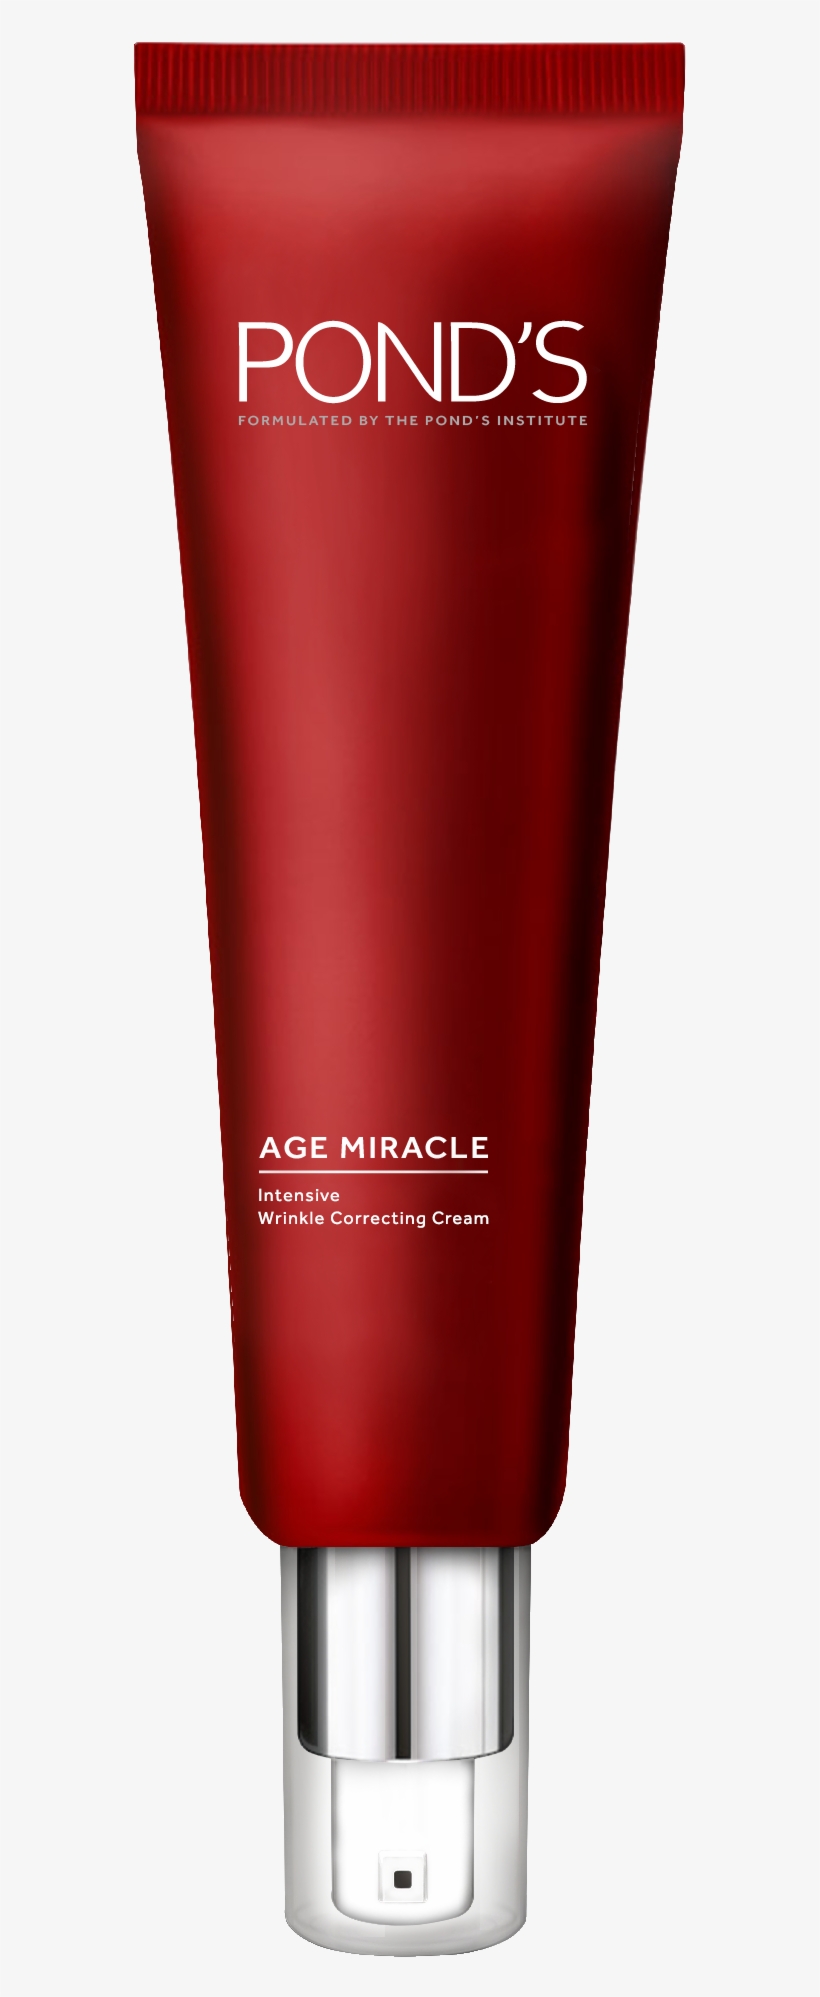 Ladies, Get Your Hands On The New Pond's Age Miracle - Bb Cream Detox Clarins, transparent png #8146093